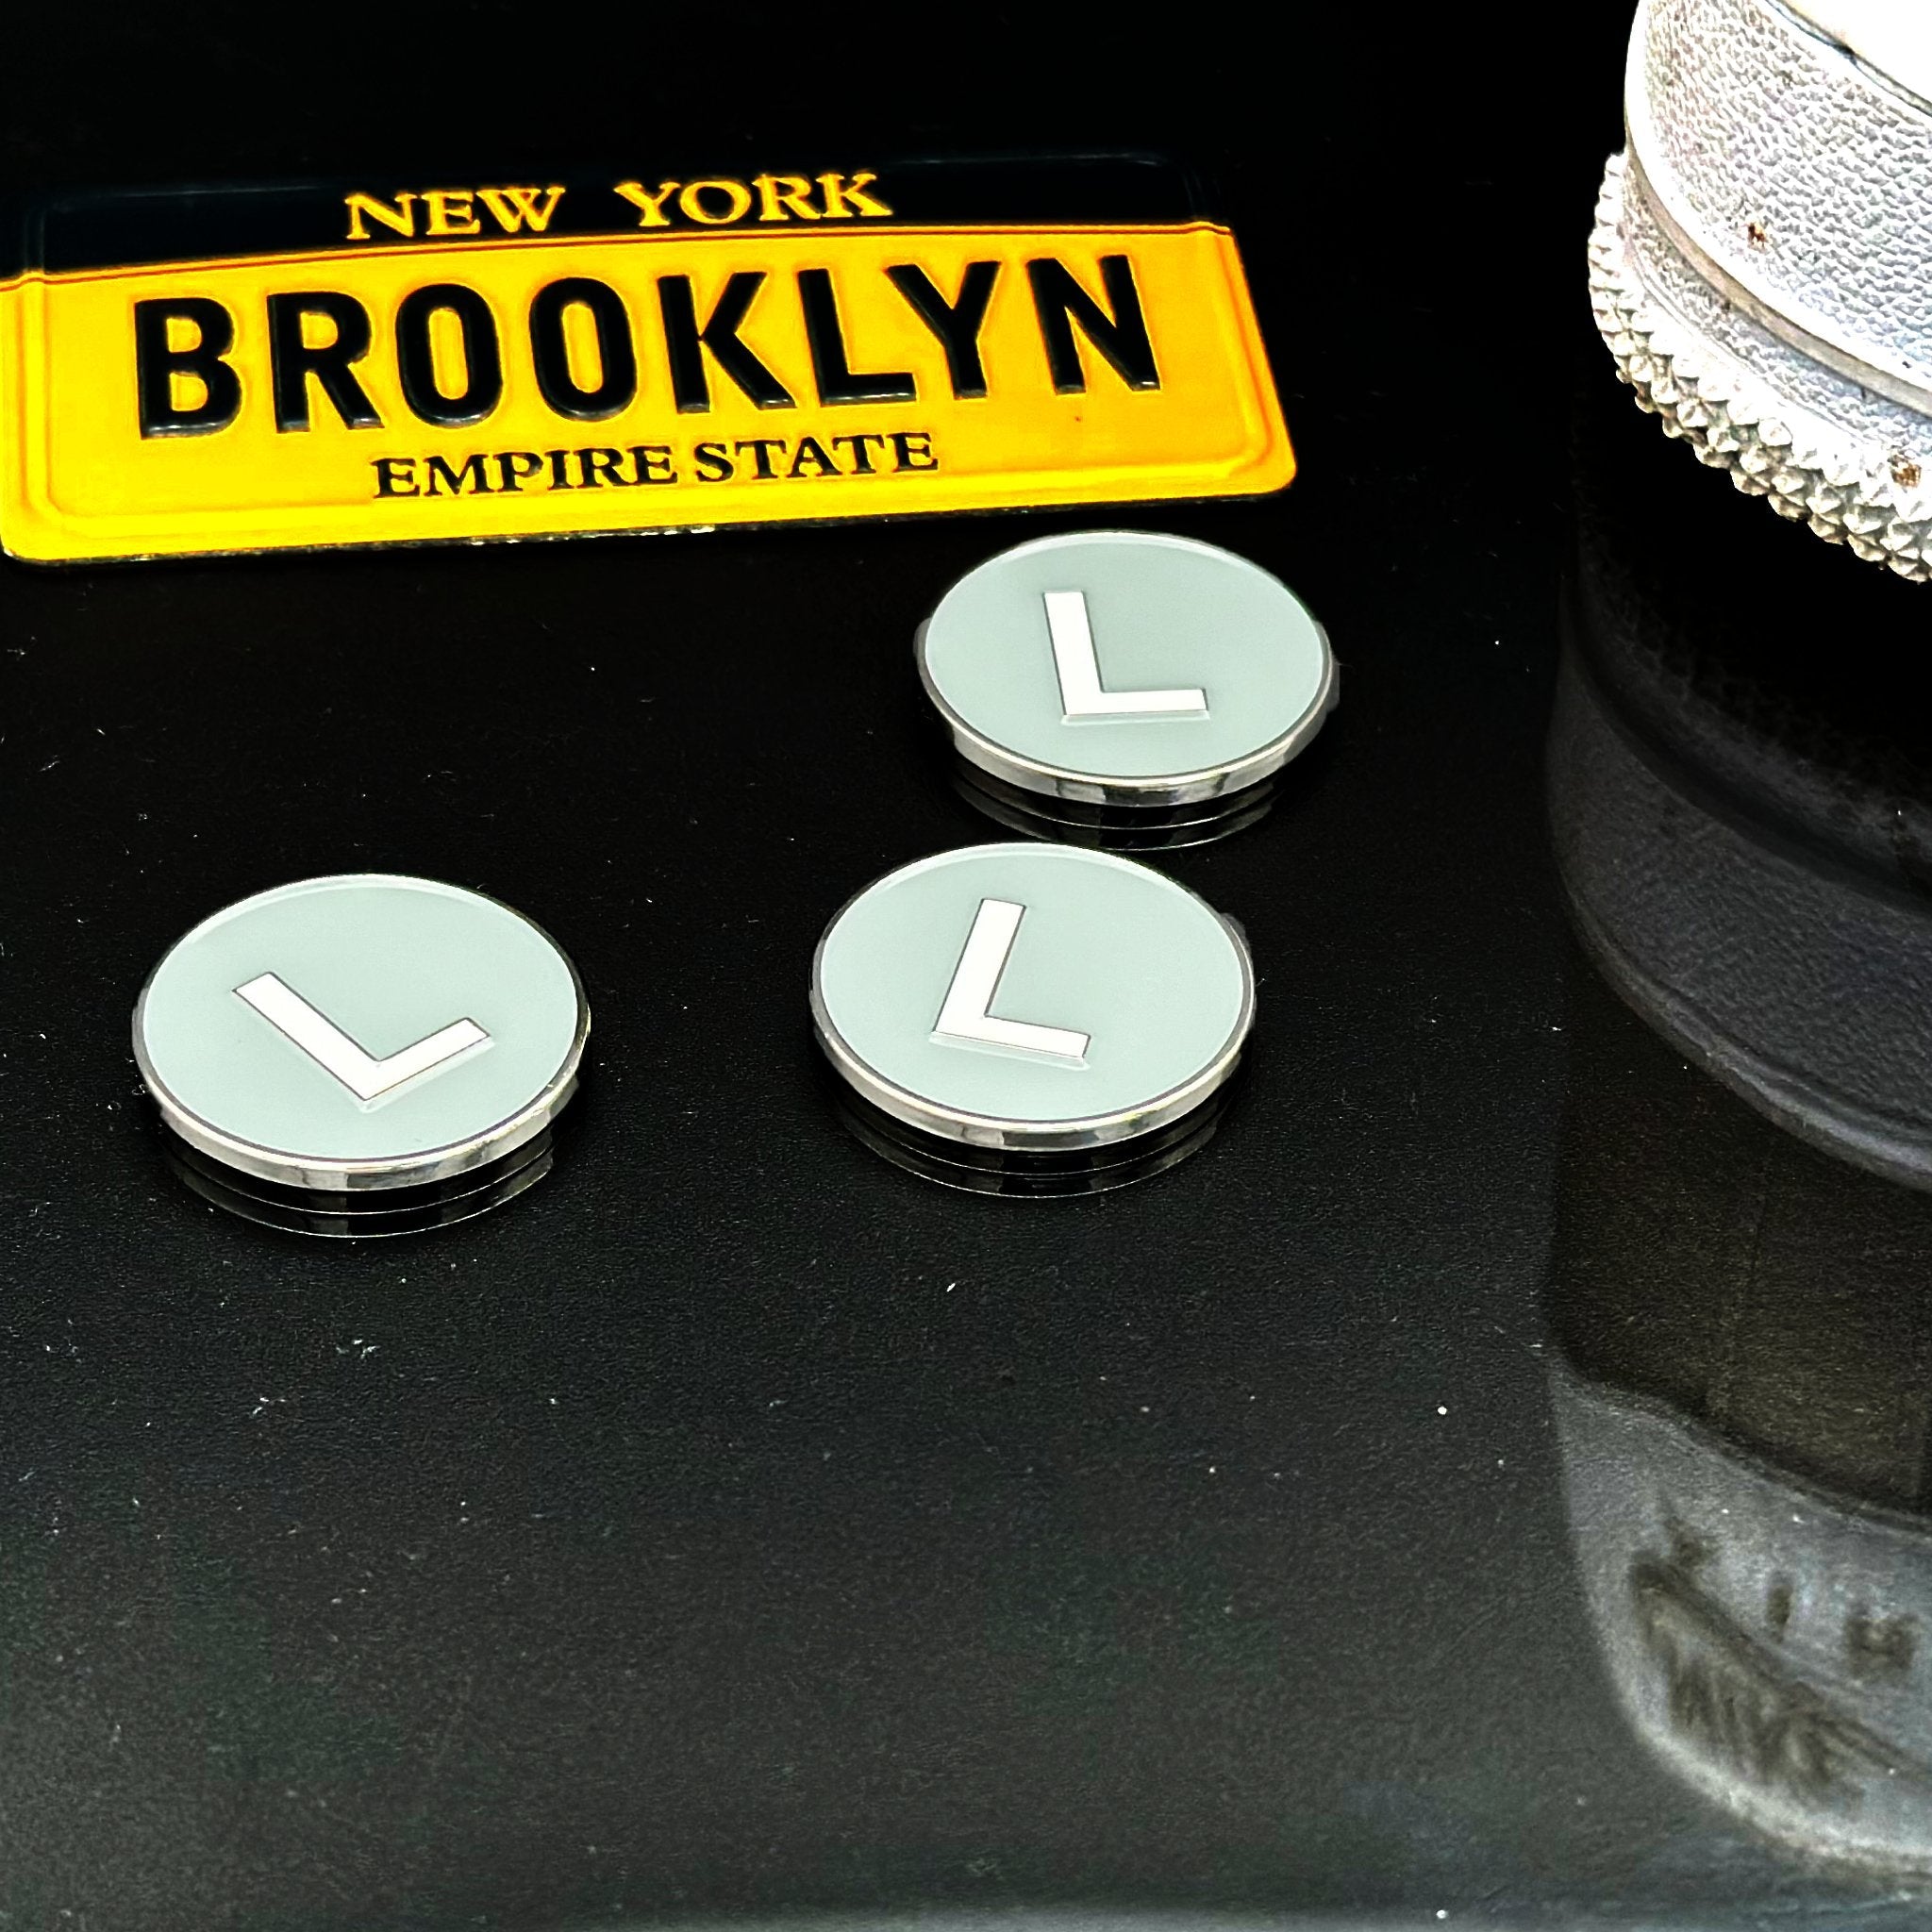 L Train Fun Magnetic Golf Ball Marker next to a Brooklyn license plate and a pair of Nike Air Force Ones.